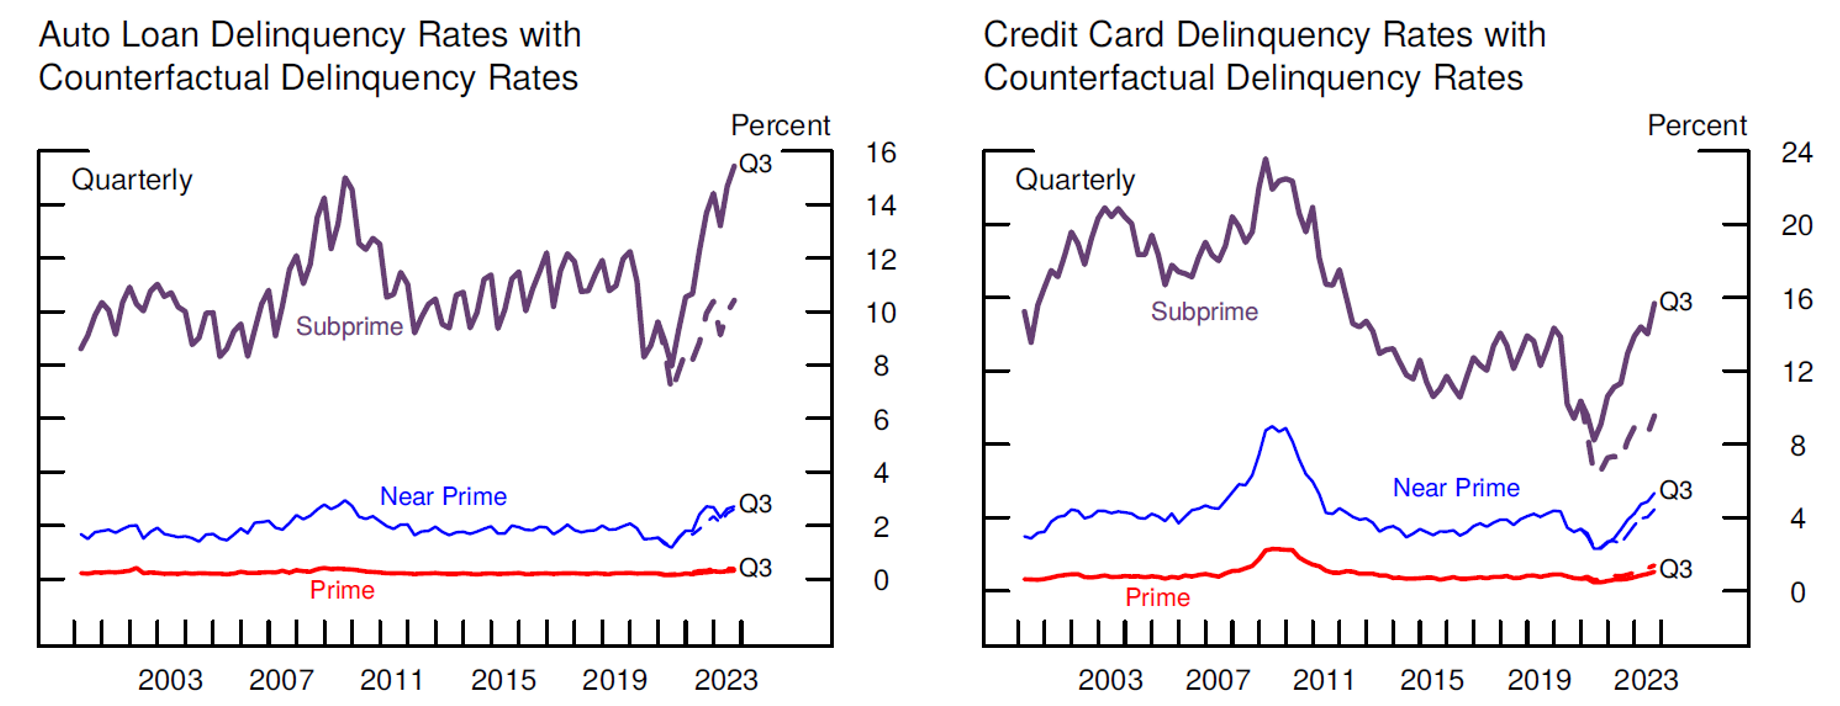 Figure 4. After adjusting for credit score migration, subprime delinquency rate increases are more muted. See accessible link for data.